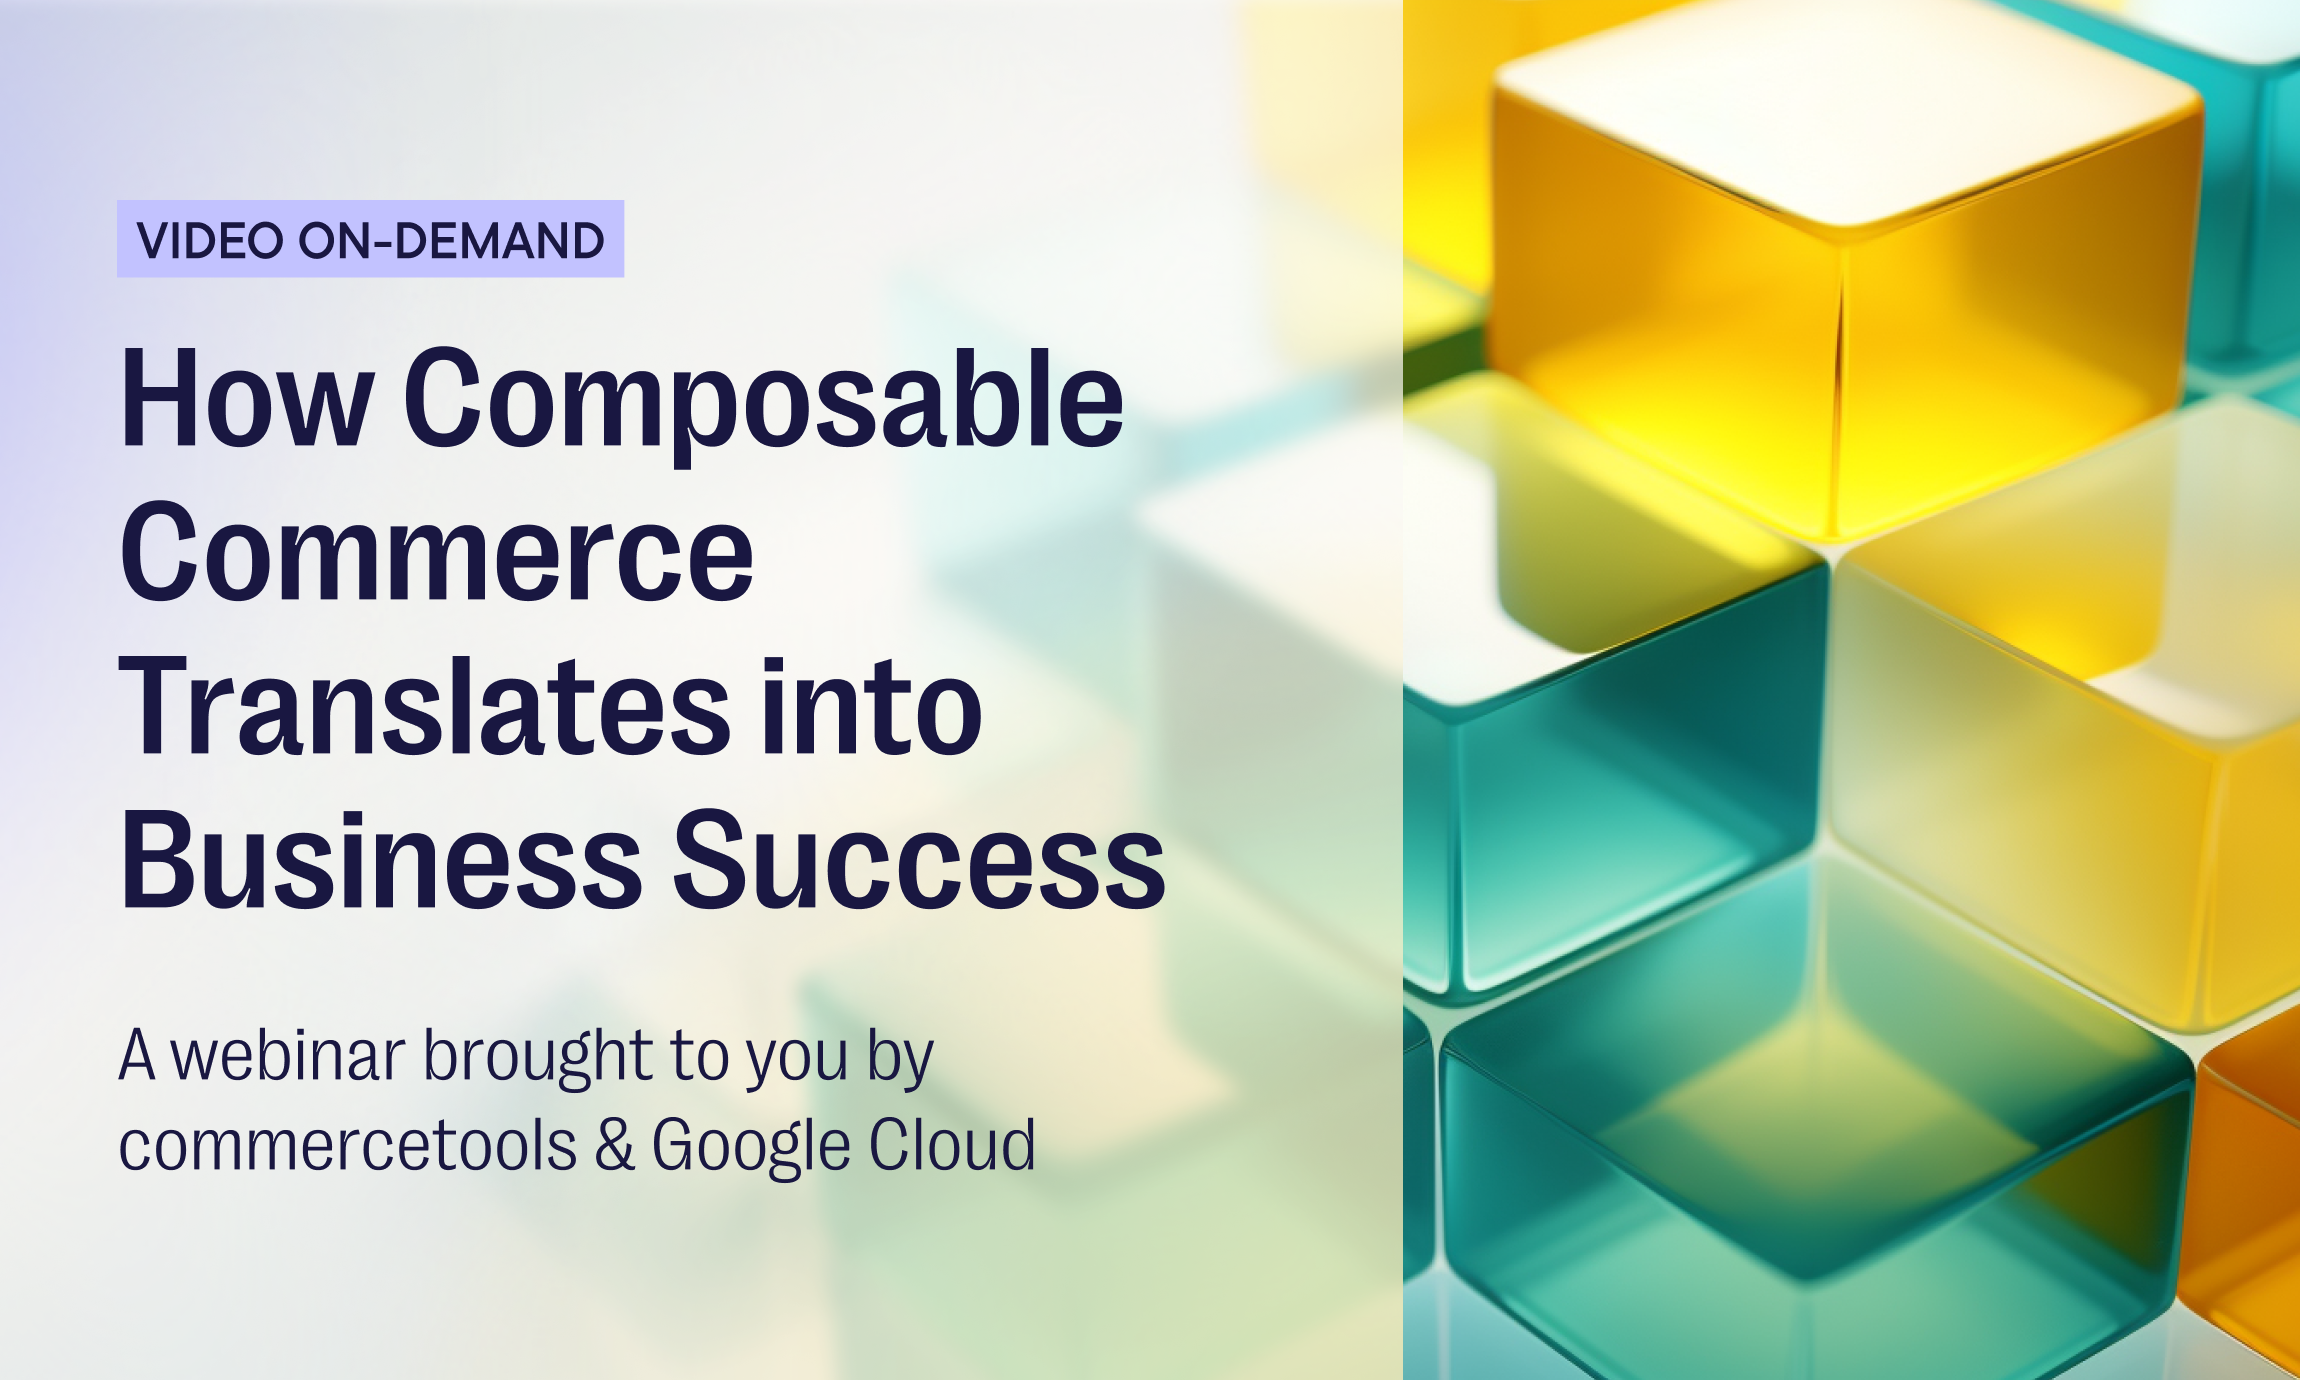 The power of composable commerce: Unlocking business success